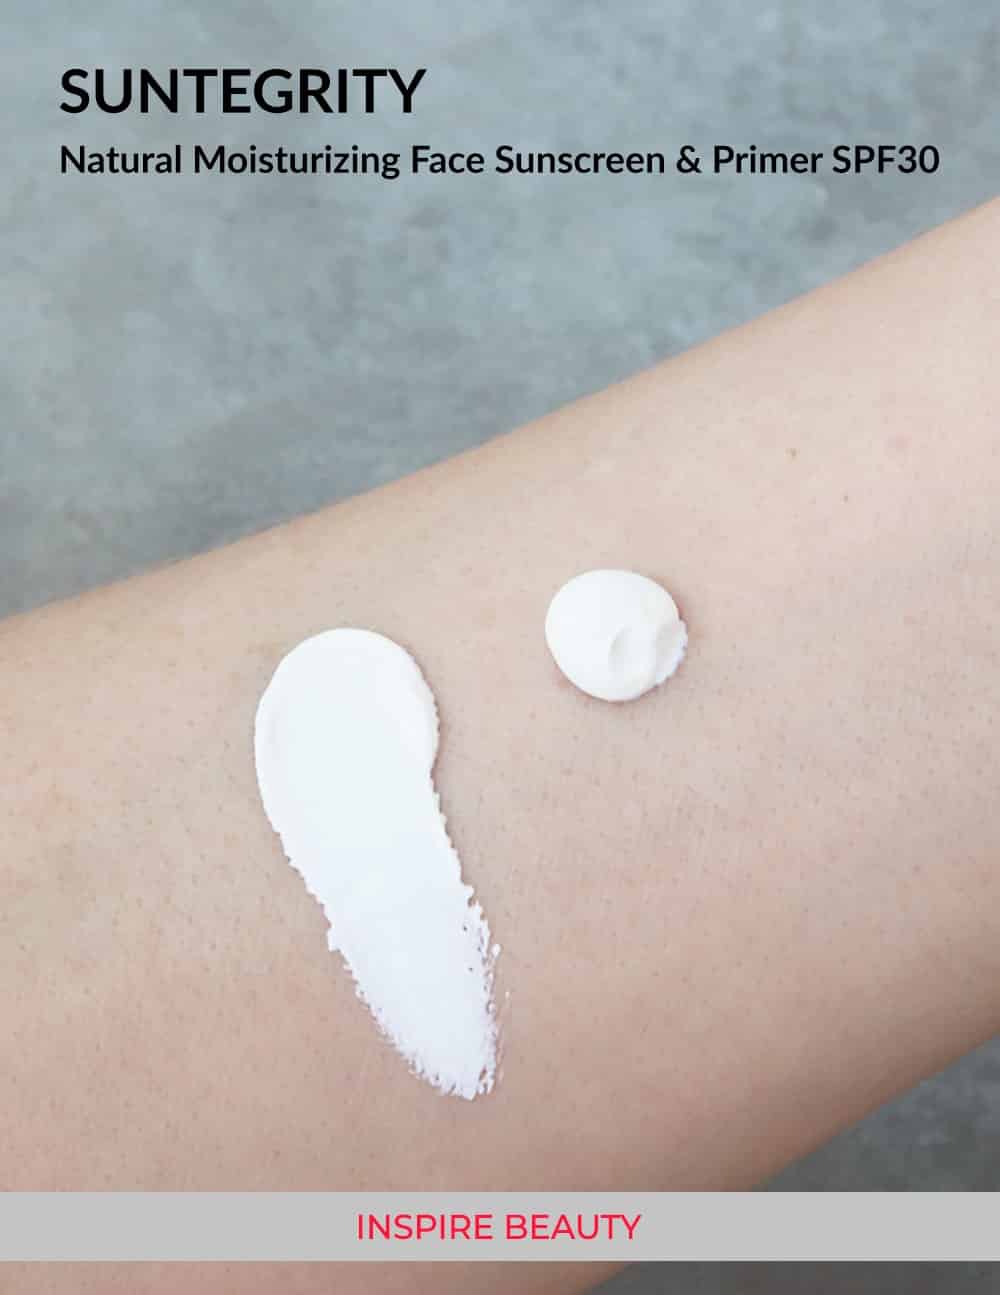 Suntegrity Natural Moisturizing Face Sunscreen swatches, moisturizing primer and sunscreen, perfect smoothing base under makeup.